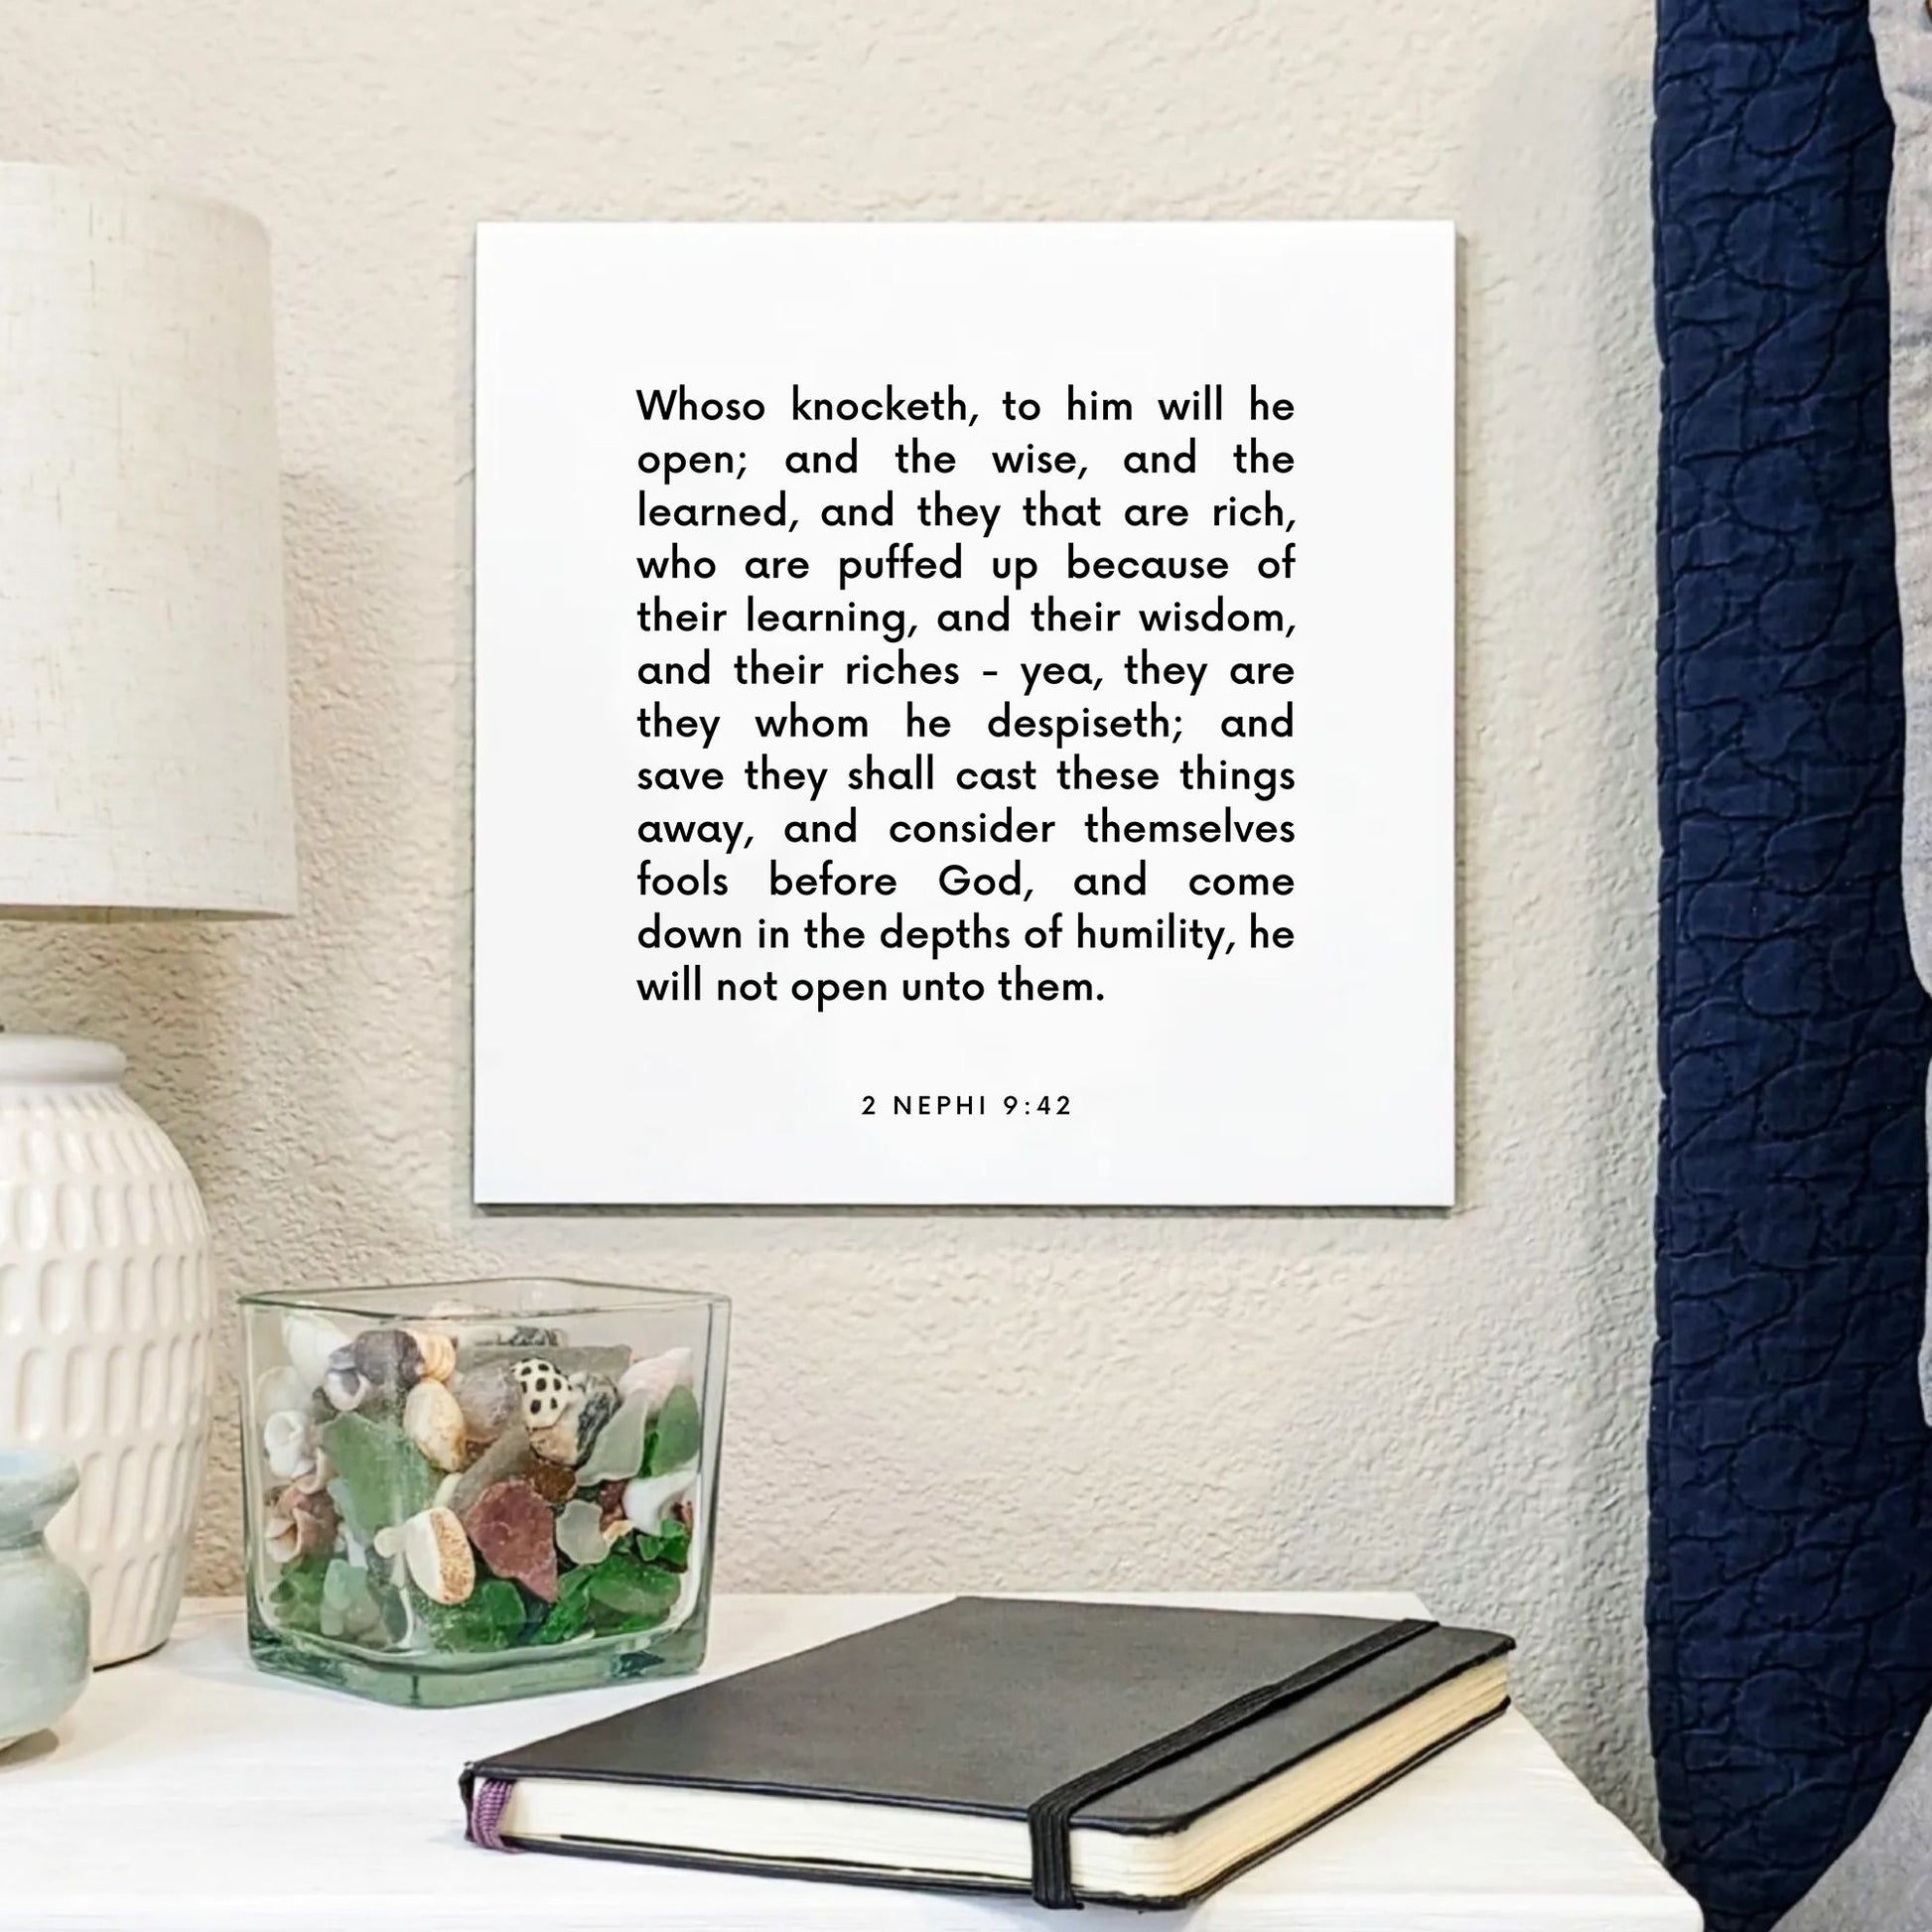 Bedside mouting of the scripture tile for 2 Nephi 9:42 - "Whoso knocketh, to him will he open"